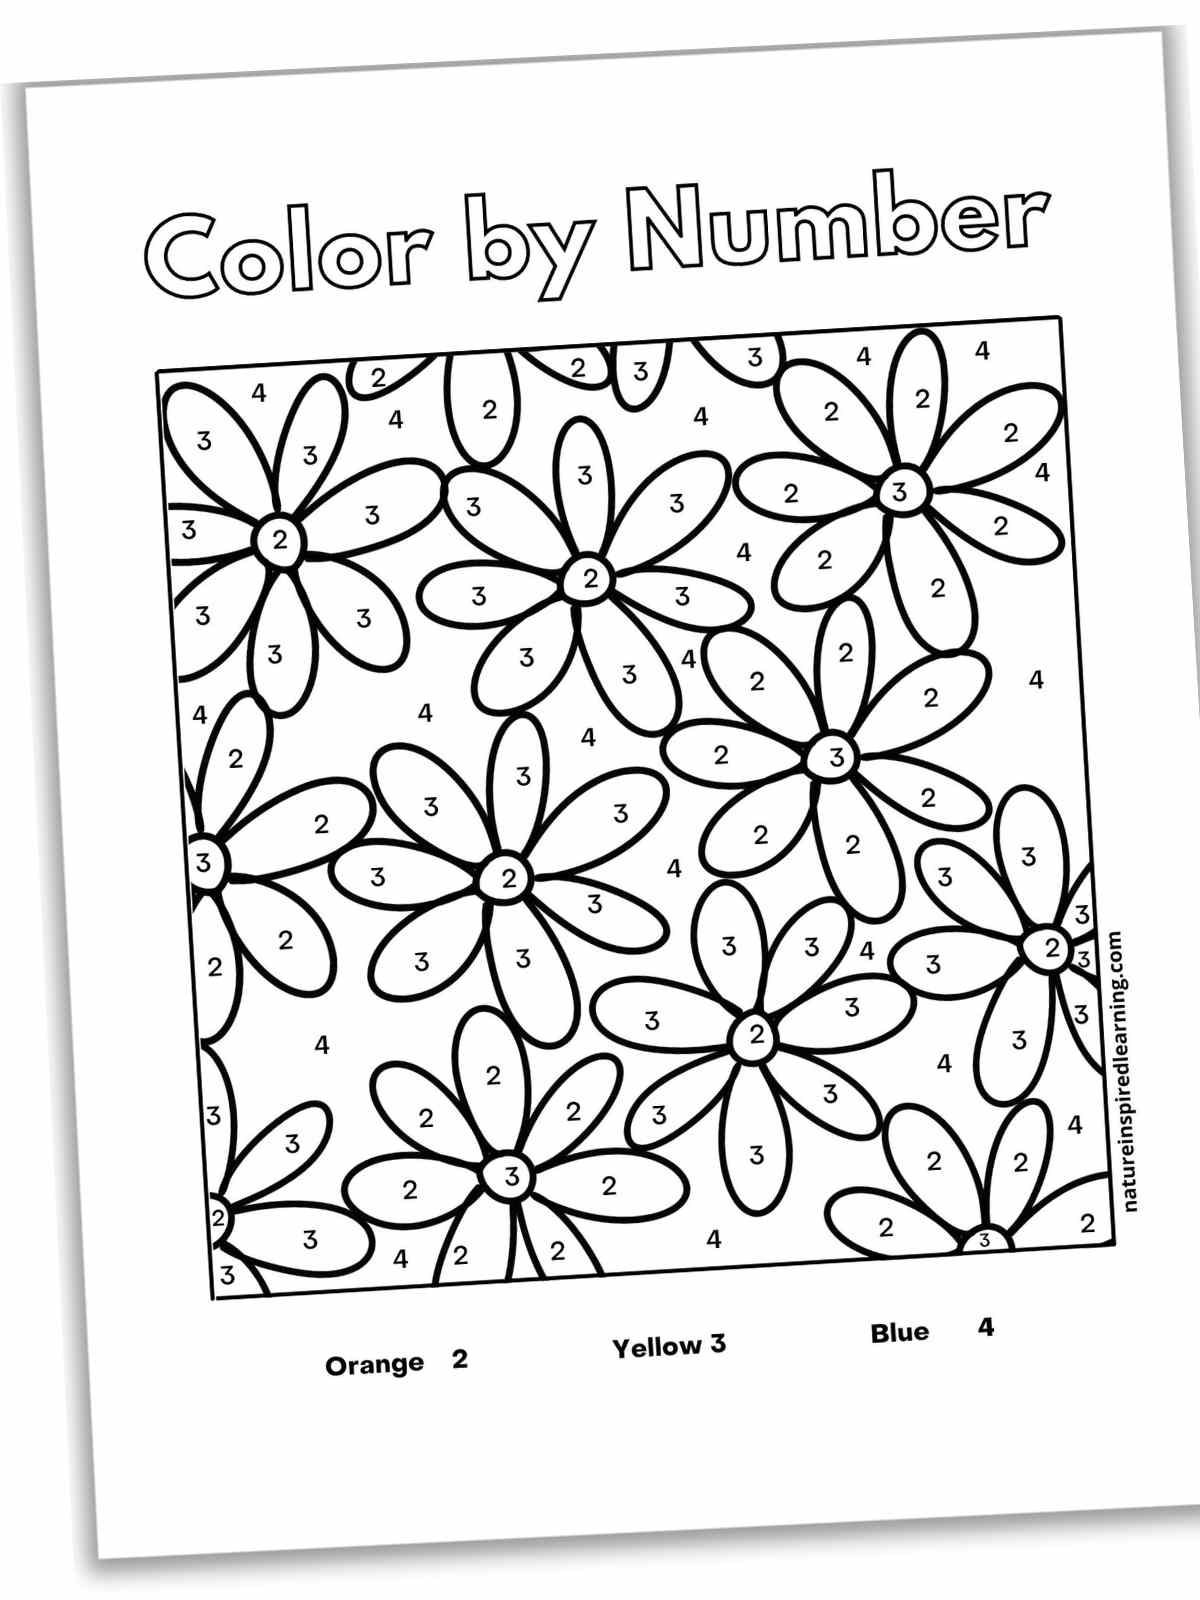 Flowers color by number for kids ages 8-12: Stress relieving and